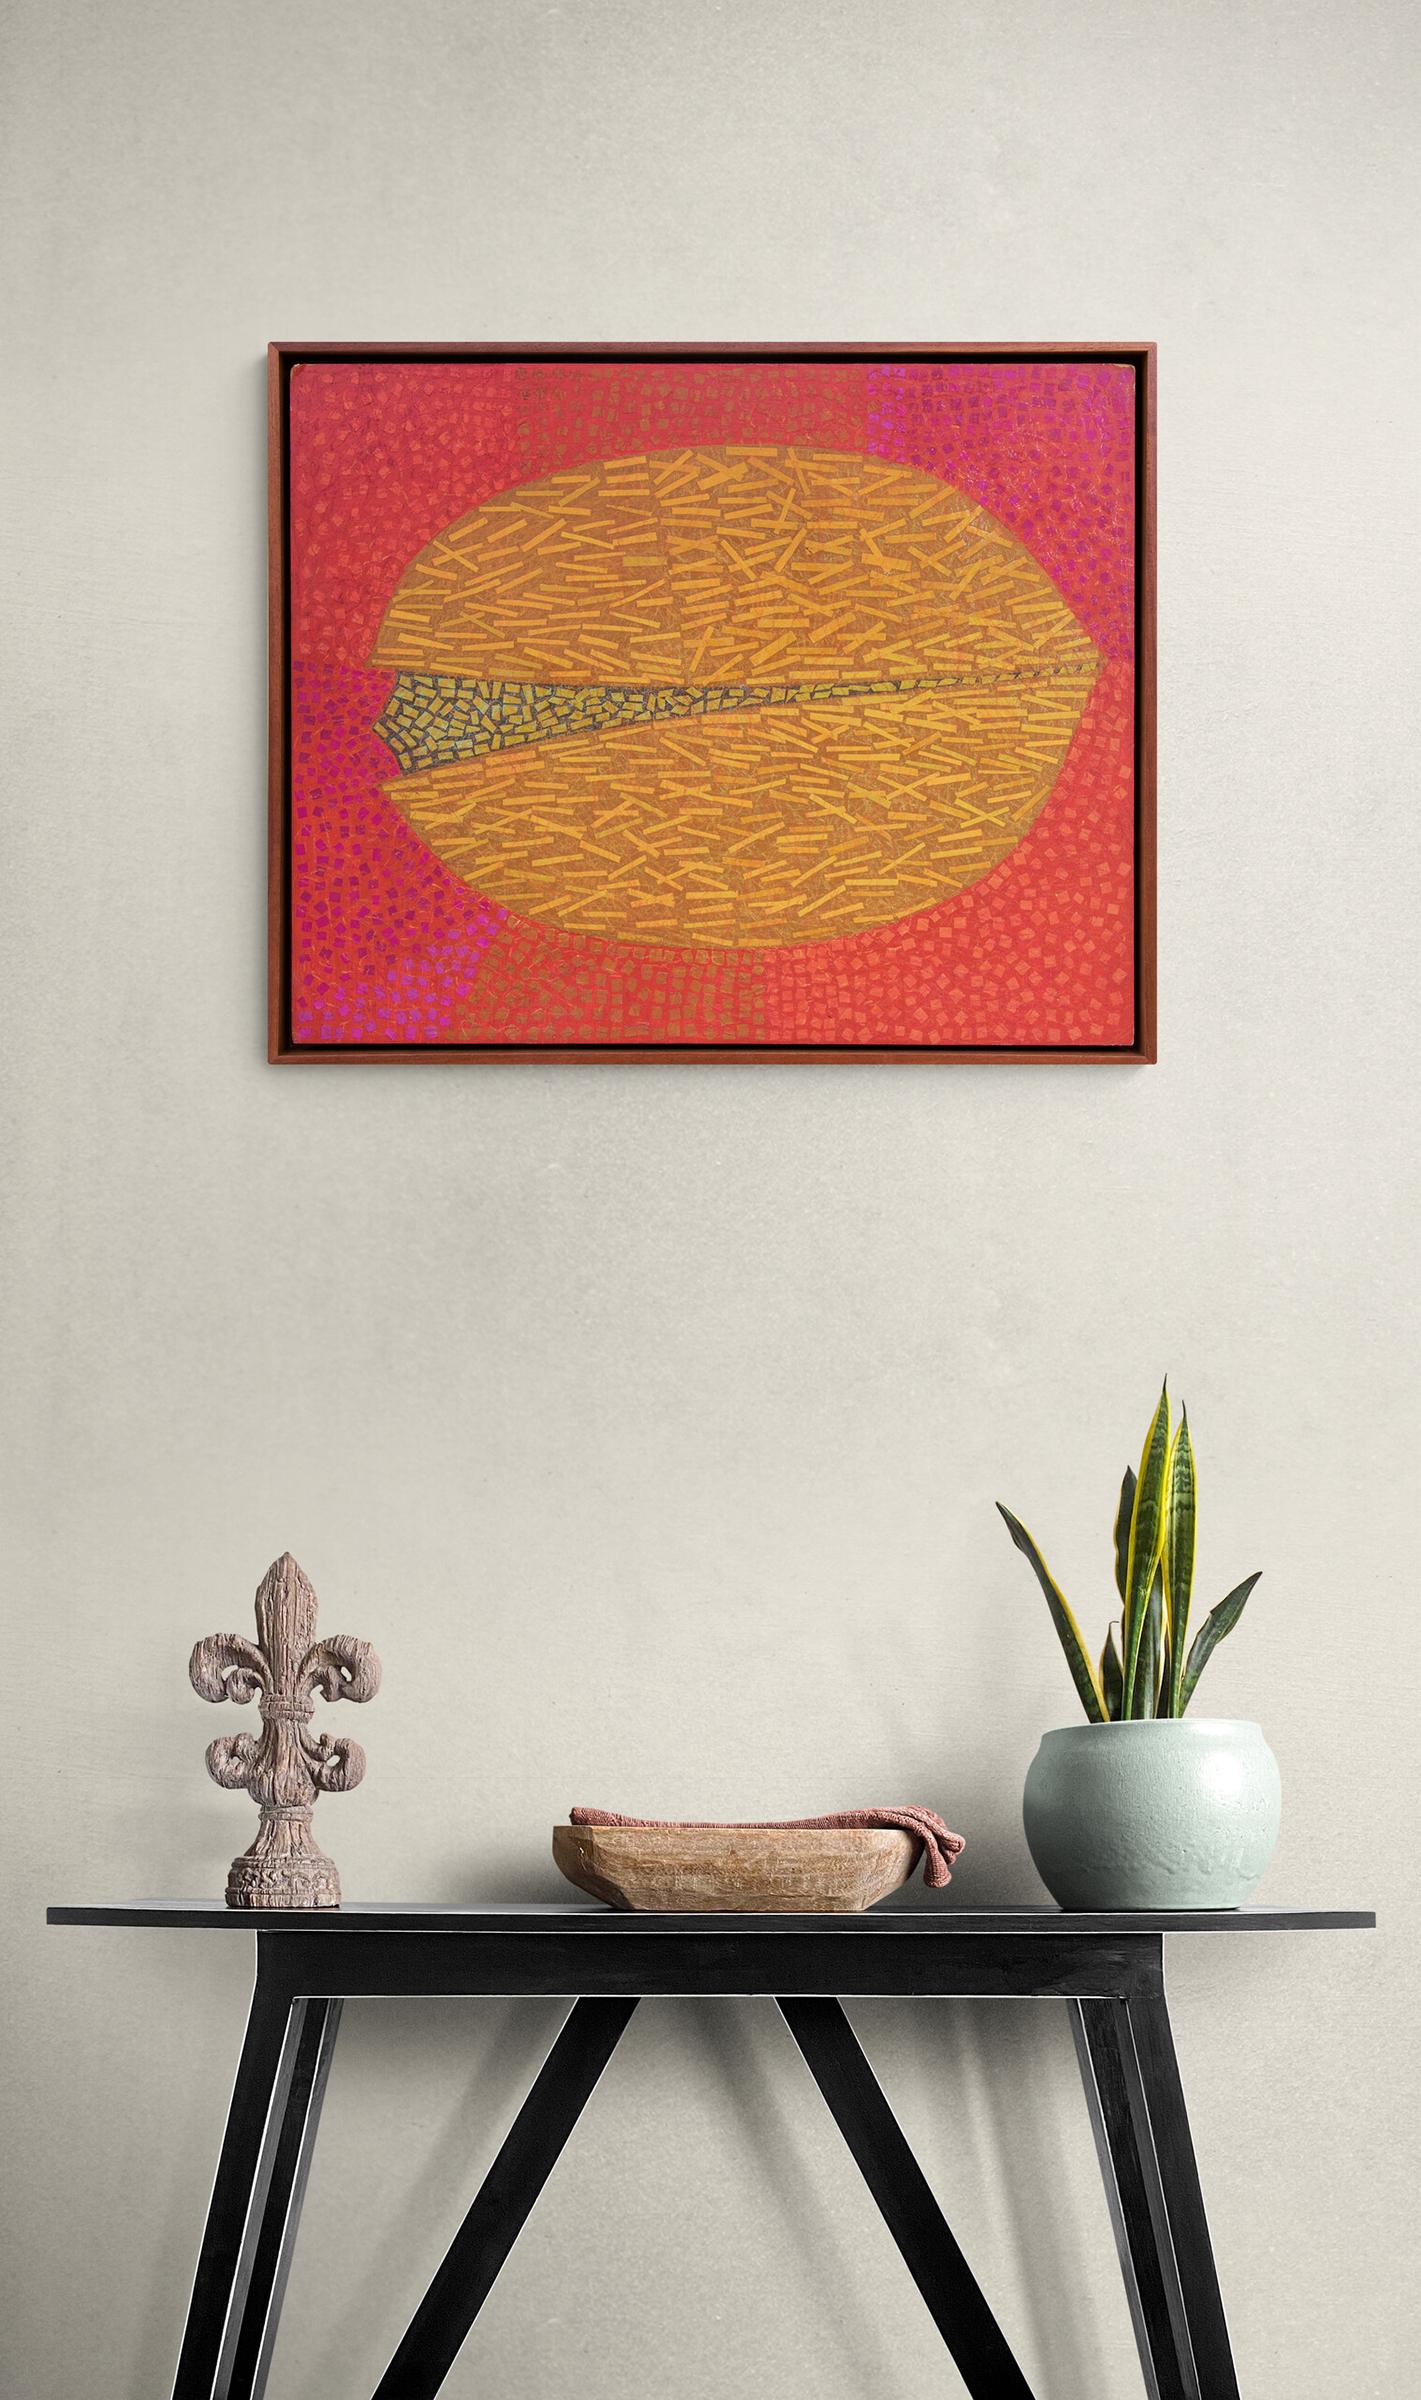 Crayon and paper collage on board depicting a pistachio nut by 20th century artist, Margo Hoff circa 1970.  Presented in a custom wood frame, outer dimensions measure 25 ¾ x 31 ½ x 2 inches.  Image size is 24 x 30 inches.

Piece is in very good